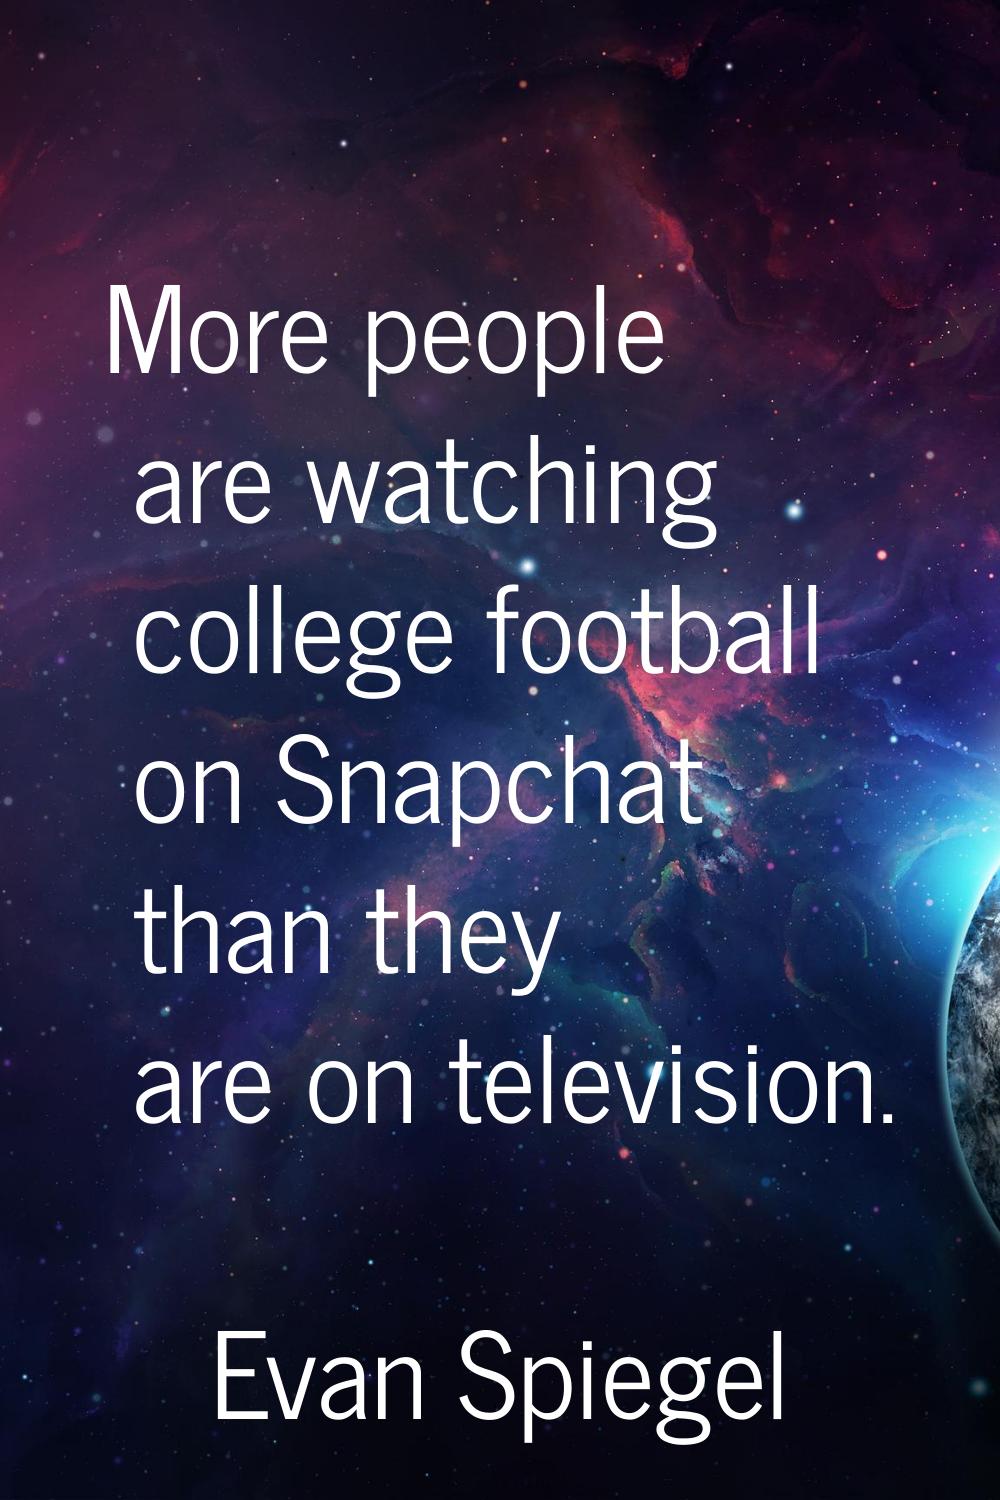 More people are watching college football on Snapchat than they are on television.